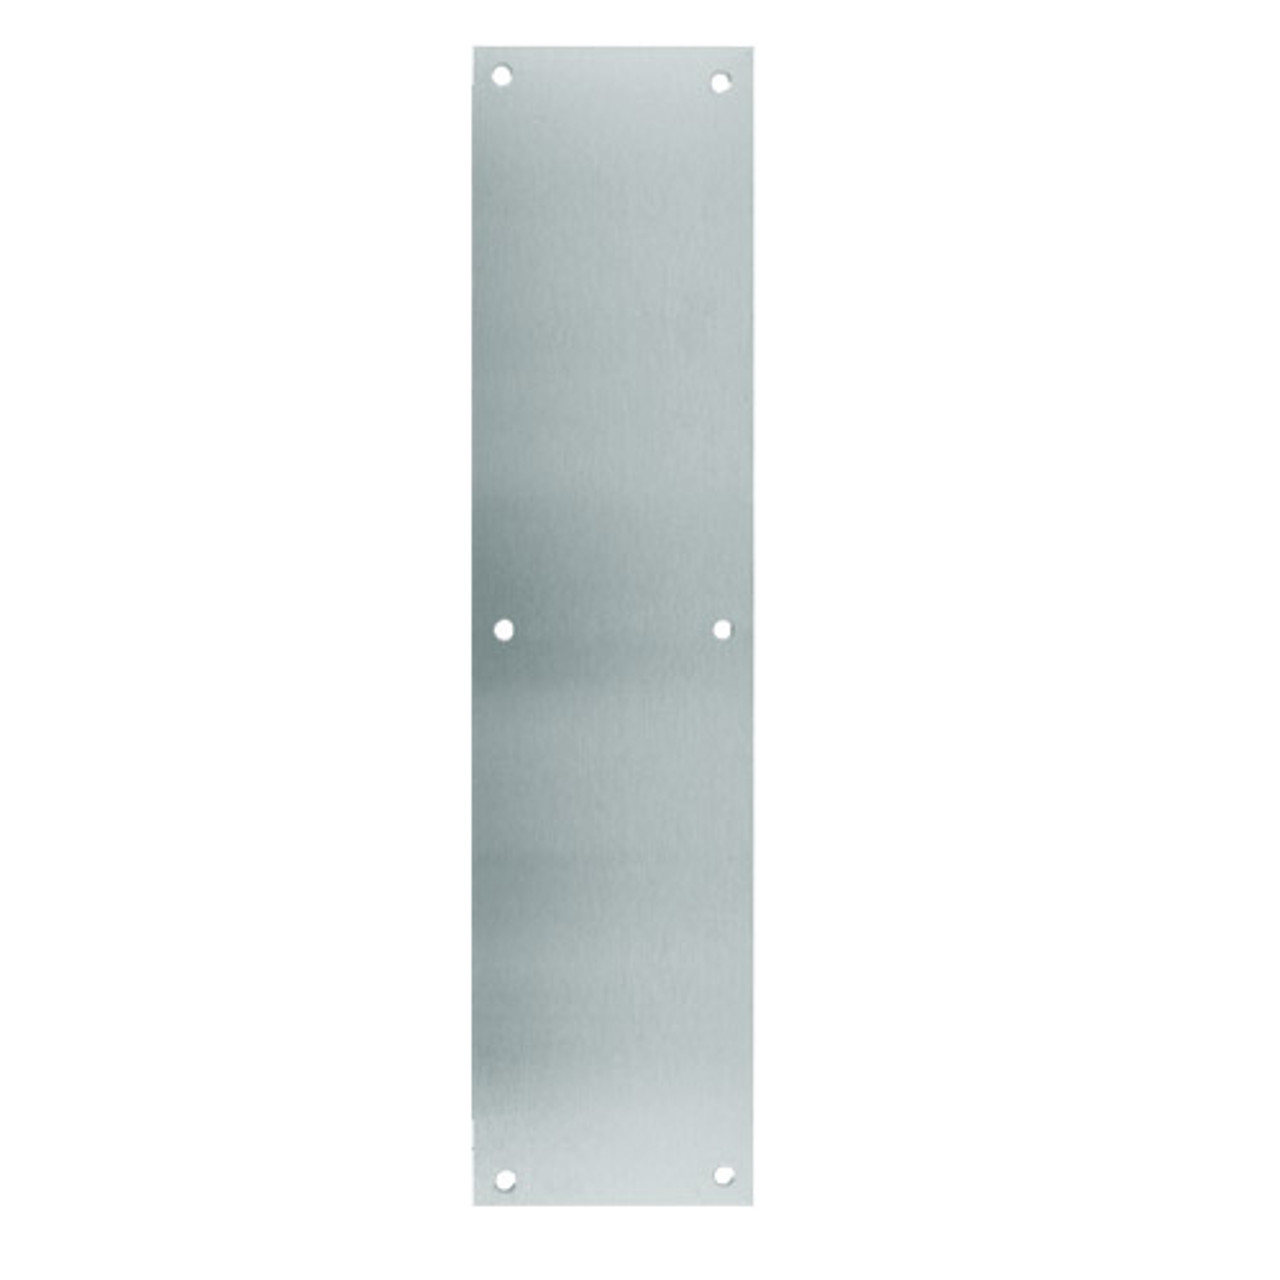 70-629 Don Jo 0.50 Push Plate in Bright Stainless Steel Finish